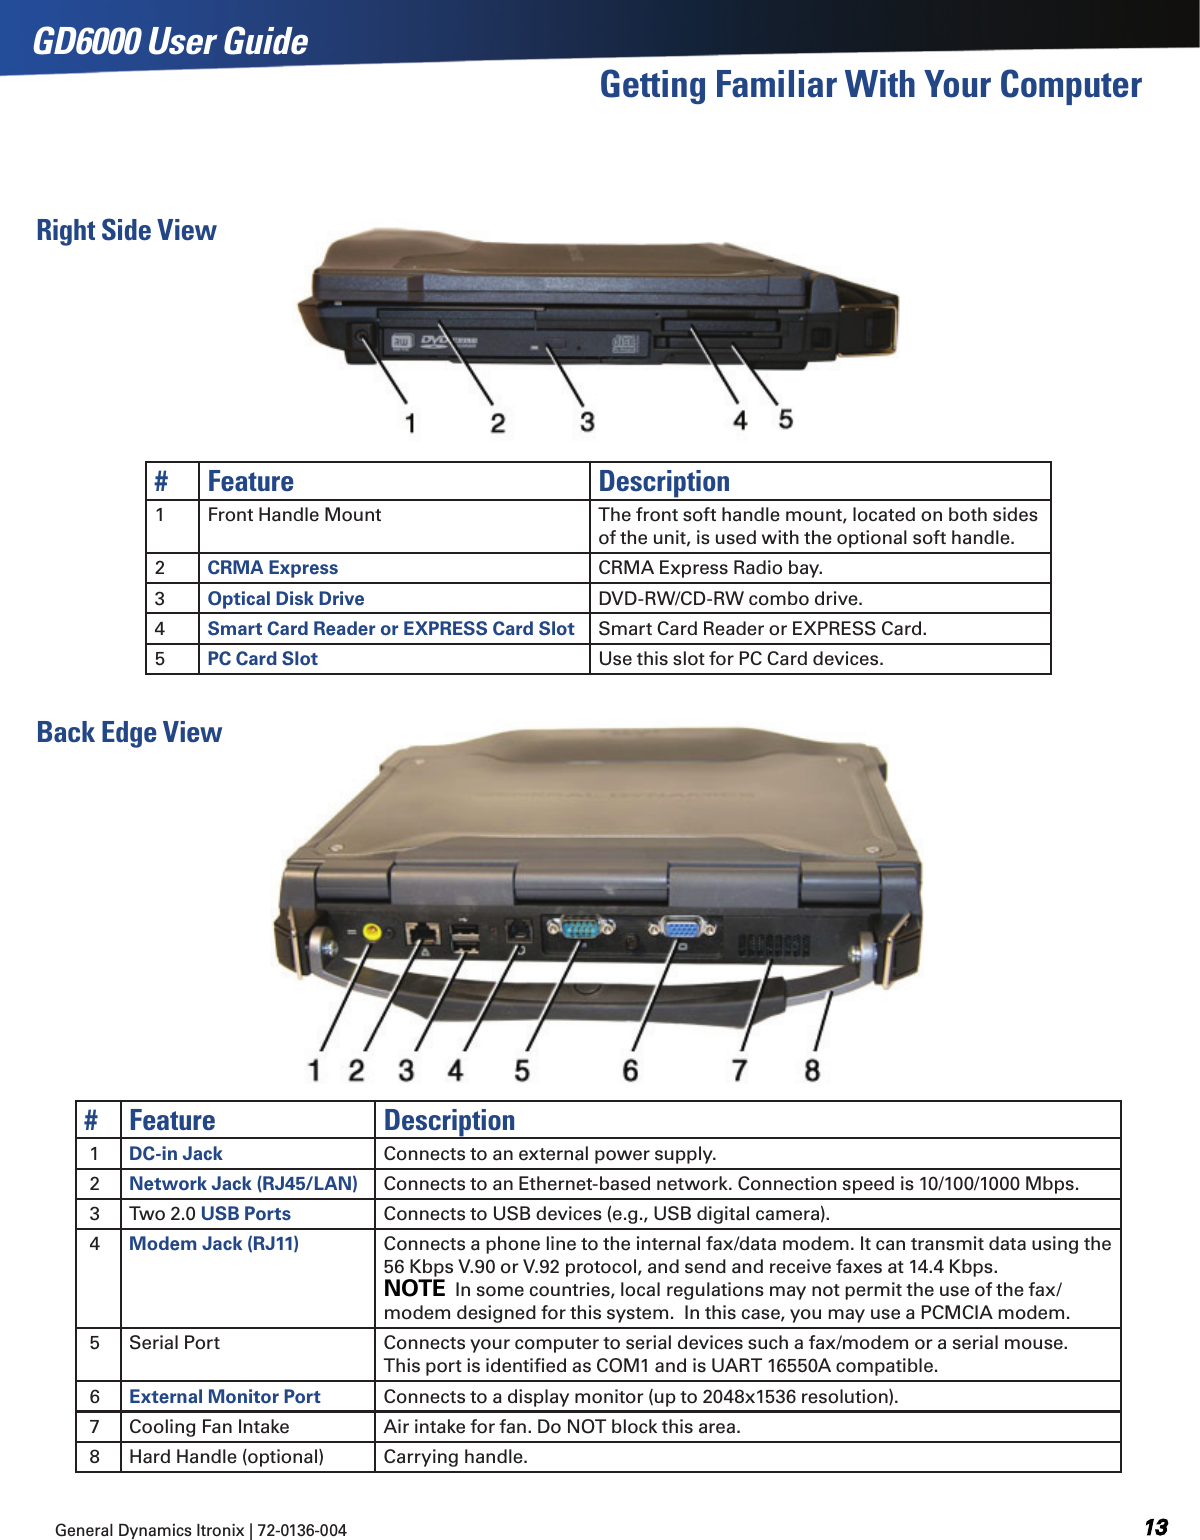 General Dynamics Itronix | 72-0136-004  GD6000 User GuideGetting Familiar With Your Computer# Feature Description1 Front Handle Mount The front soft handle mount, located on both sides of the unit, is used with the optional soft handle.2CRMA Express CRMA Express Radio bay.3Optical Disk Drive DVD-RW/CD-RW combo drive.4Smart Card Reader or EXPRESS Card Slot Smart Card Reader or EXPRESS Card.5PC Card Slot Use this slot for PC Card devices.Right Side View# Feature Description 1 DC-in Jack Connects to an external power supply. 2 Network Jack (RJ45/LAN) Connects to an Ethernet-based network. Connection speed is 10/100/1000 Mbps. 3 Two 2.0 USB Ports Connects to USB devices (e.g., USB digital camera). 4 Modem Jack (RJ11) Connects a phone line to the internal fax/data modem. It can transmit data using the 56 Kbps V.90 or V.92 protocol, and send and receive faxes at 14.4 Kbps. note  In some countries, local regulations may not permit the use of the fax/modem designed for this system.  In this case, you may use a PCMCIA modem. 5 Serial Port Connects your computer to serial devices such a fax/modem or a serial mouse.  This port is identiﬁed as COM1 and is UART 16550A compatible. 6 External Monitor Port Connects to a display monitor (up to 2048x1536 resolution). 7 Cooling Fan Intake Air intake for fan. Do NOT block this area. 8 Hard Handle (optional) Carrying handle. Back Edge View